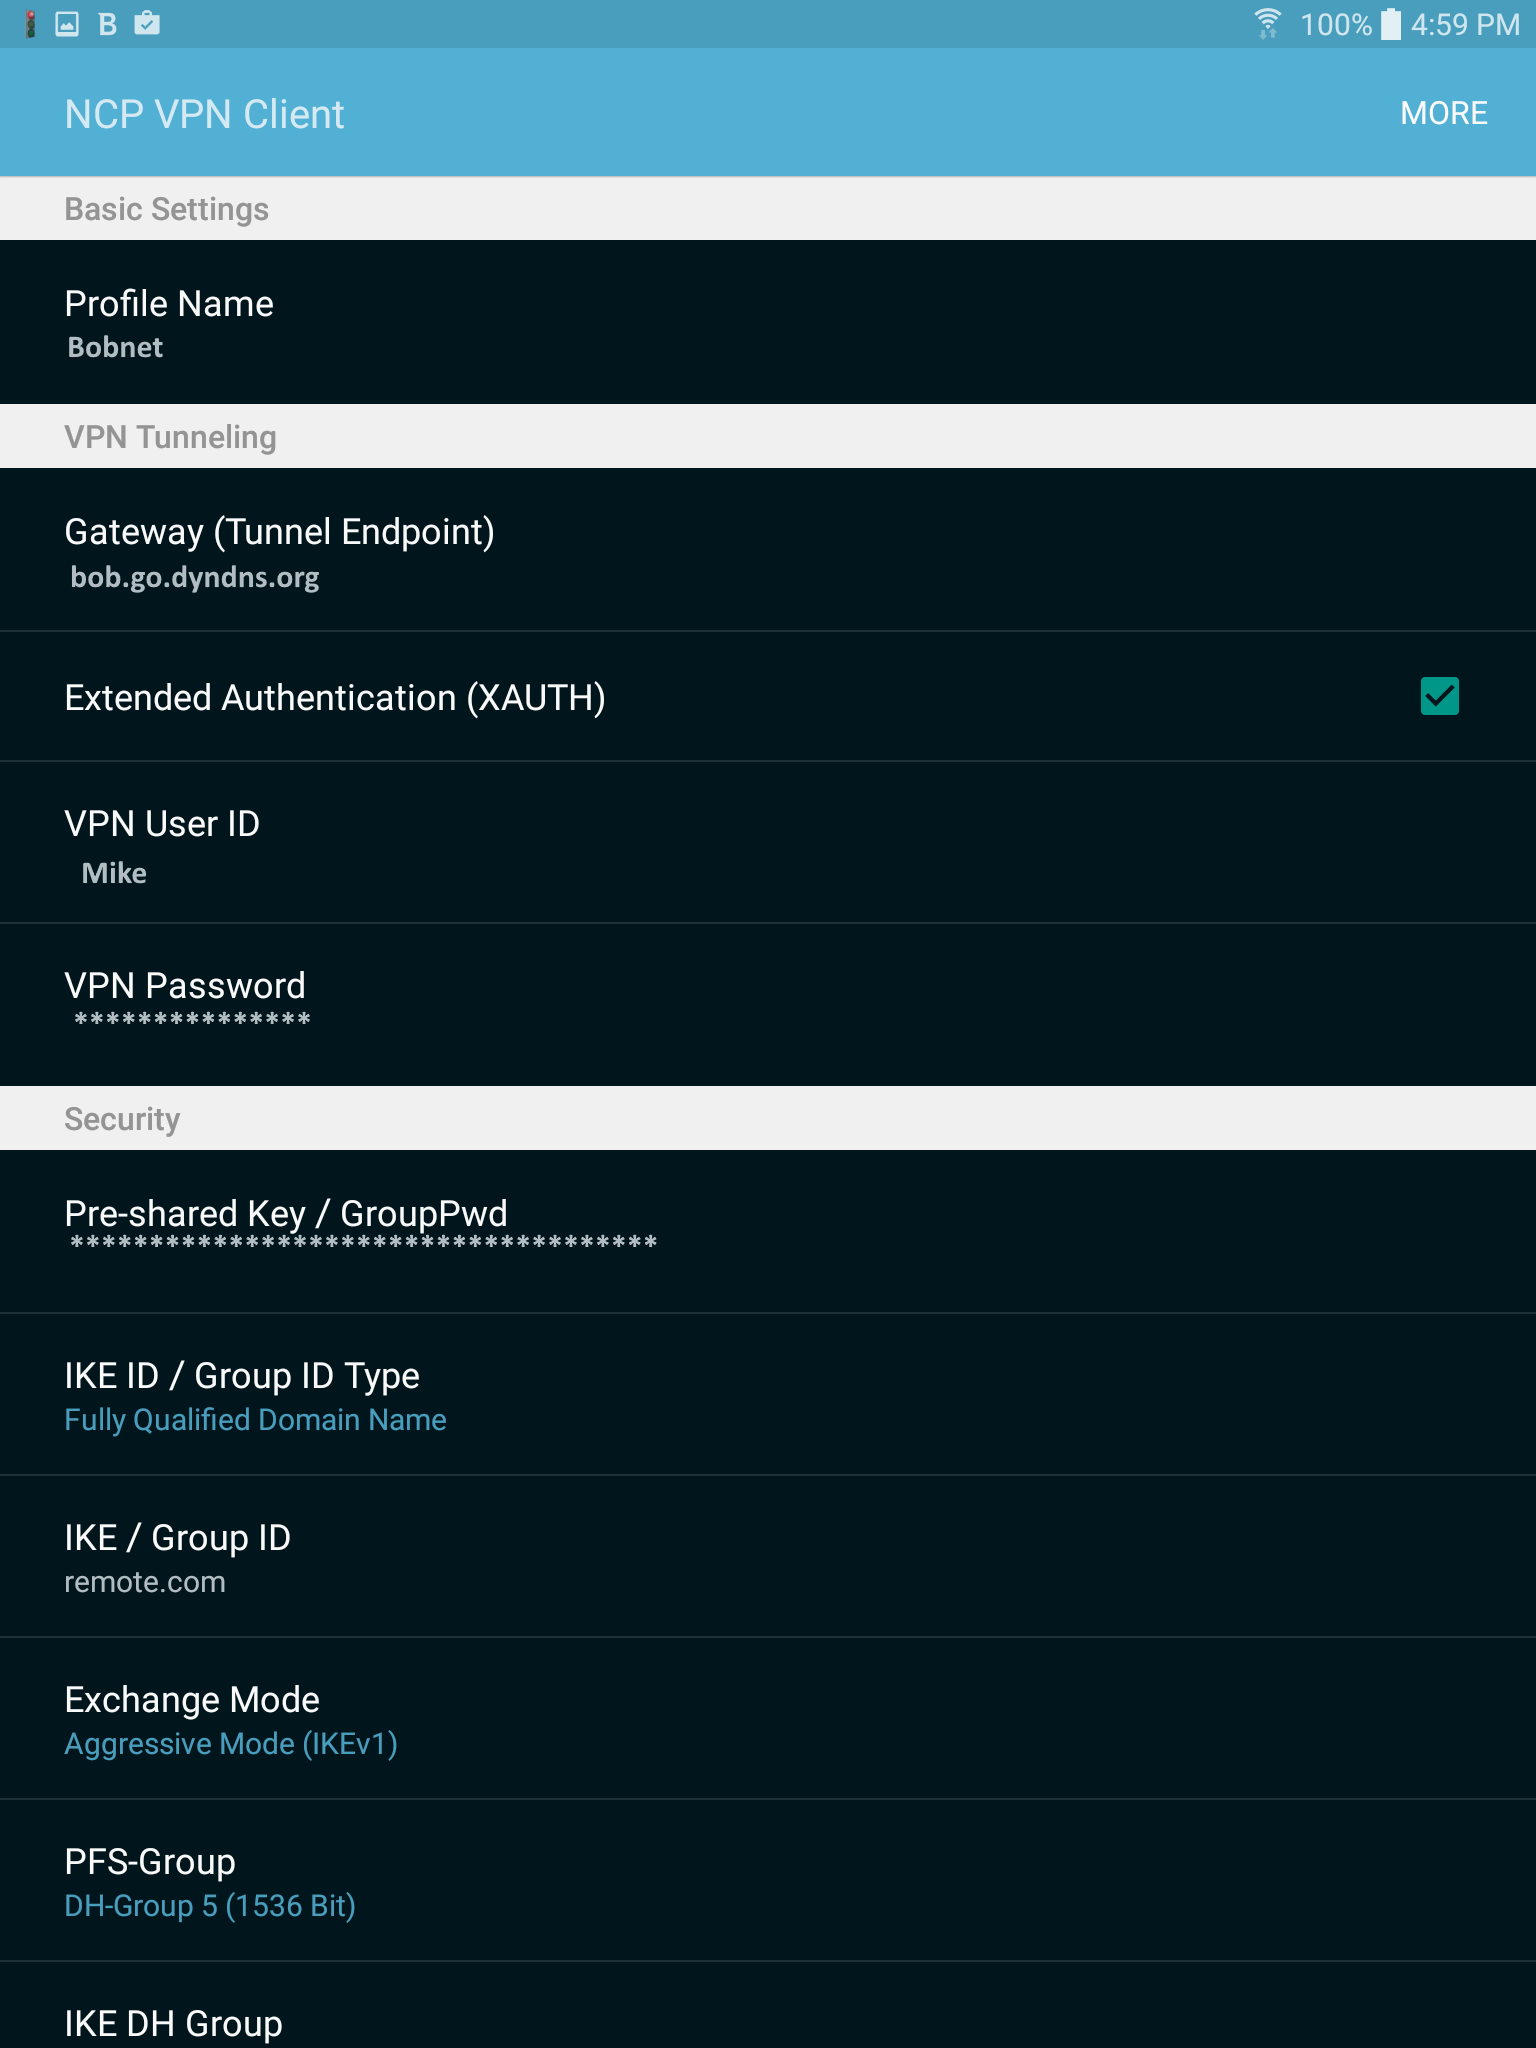 NCP VPN Client - Connection settings 1.png